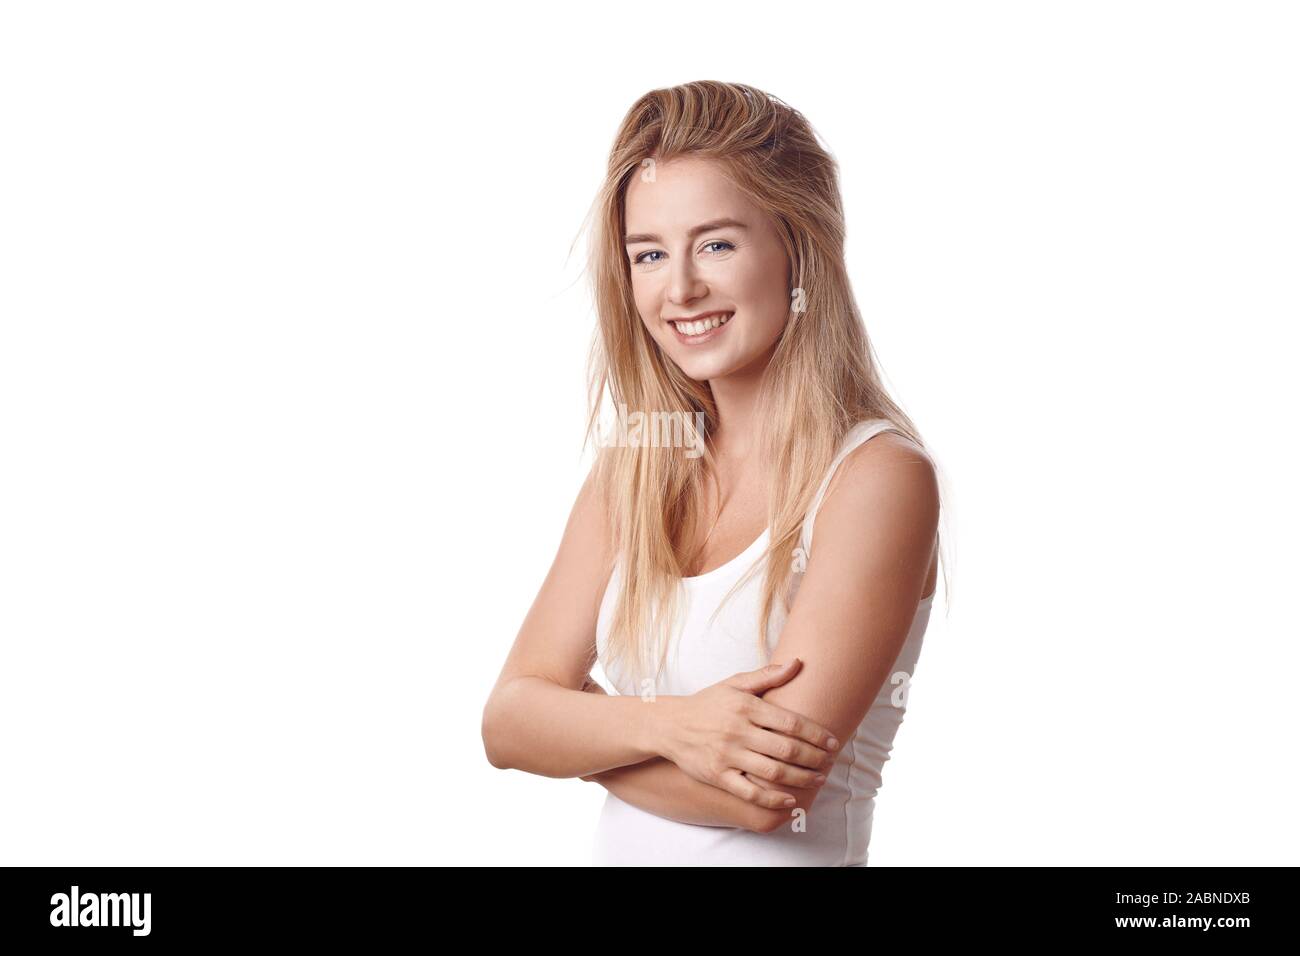 Beautiful blond young woman standing in white shirt with arms folded against white background, smiling and looking at camera. Half-turn half-length po Stock Photo